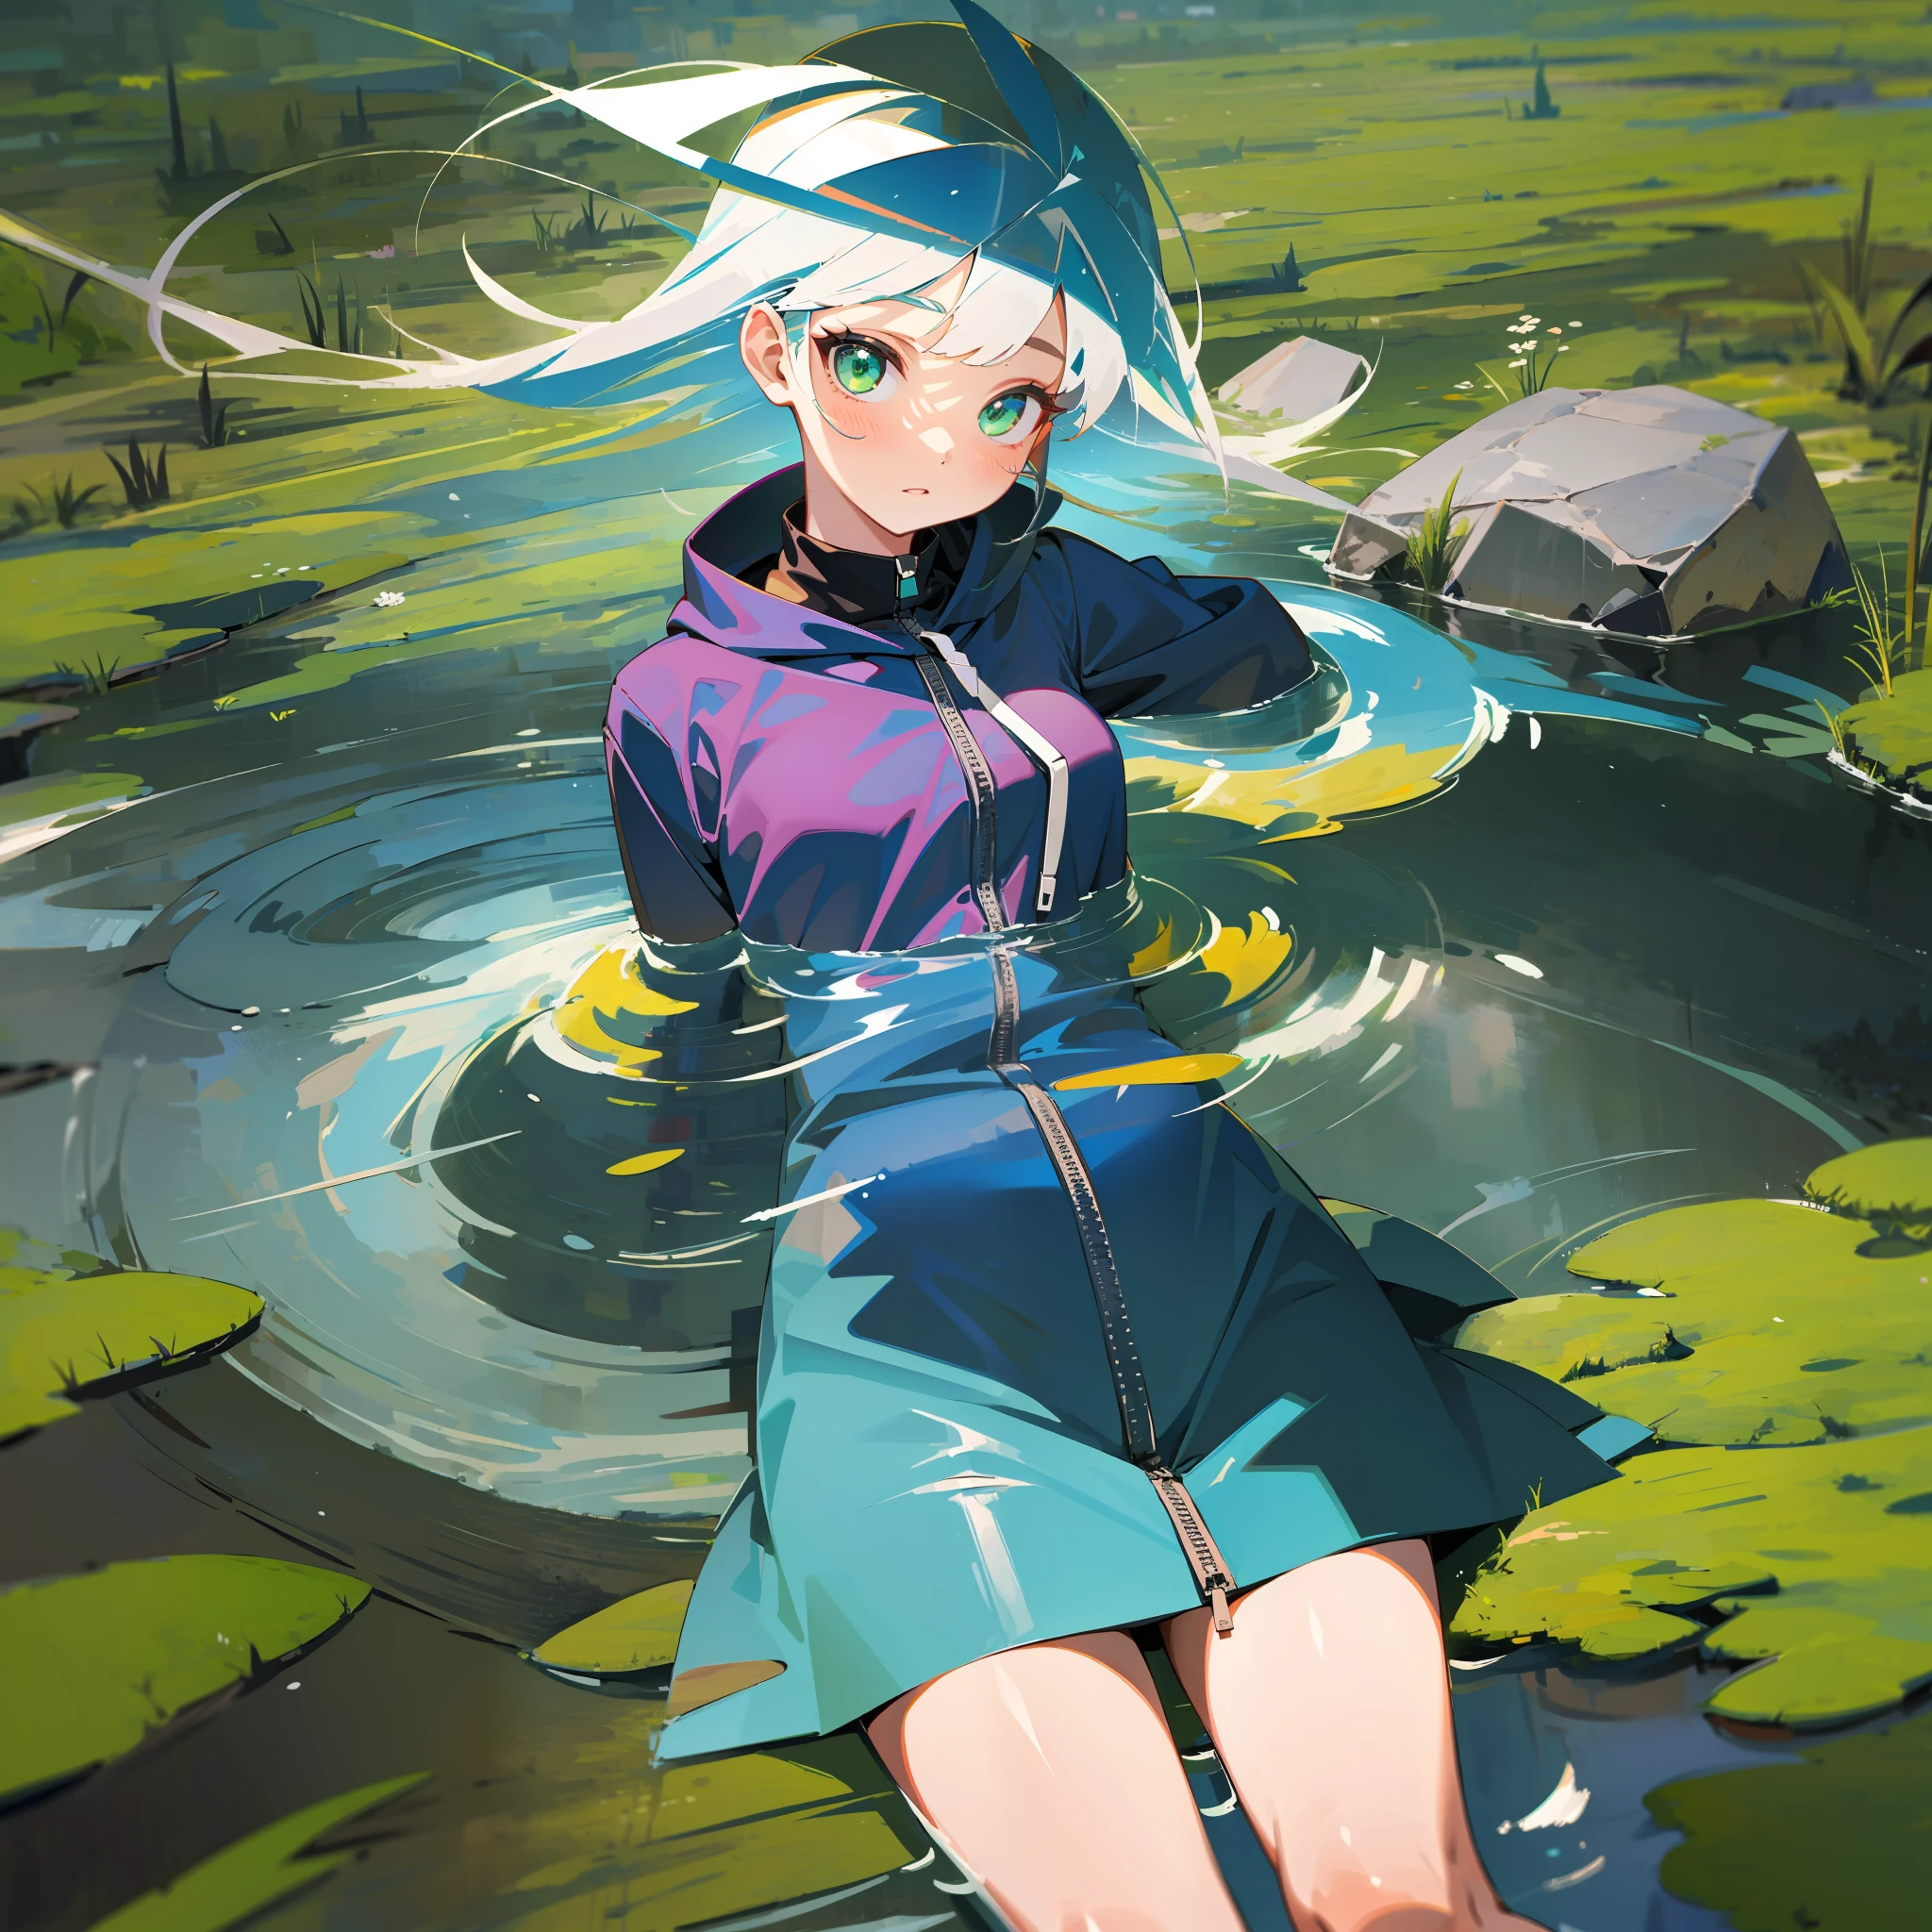 MKSKS style, (Very detailed background:1.0), (highly detailed back ground:1.0), 1girll, full_Body, , Hoodie, partly_unzipped, Masterpiece, Best quality, (1girll, Solo, Girl:1.2), Lake, Grass, walking on the water, Jumps, Stone ruins, color difference, Depth of field, Soft illuminated surface,Face only,White hair,Green eyes,Long hair,Floating hair,Small breasts,From above